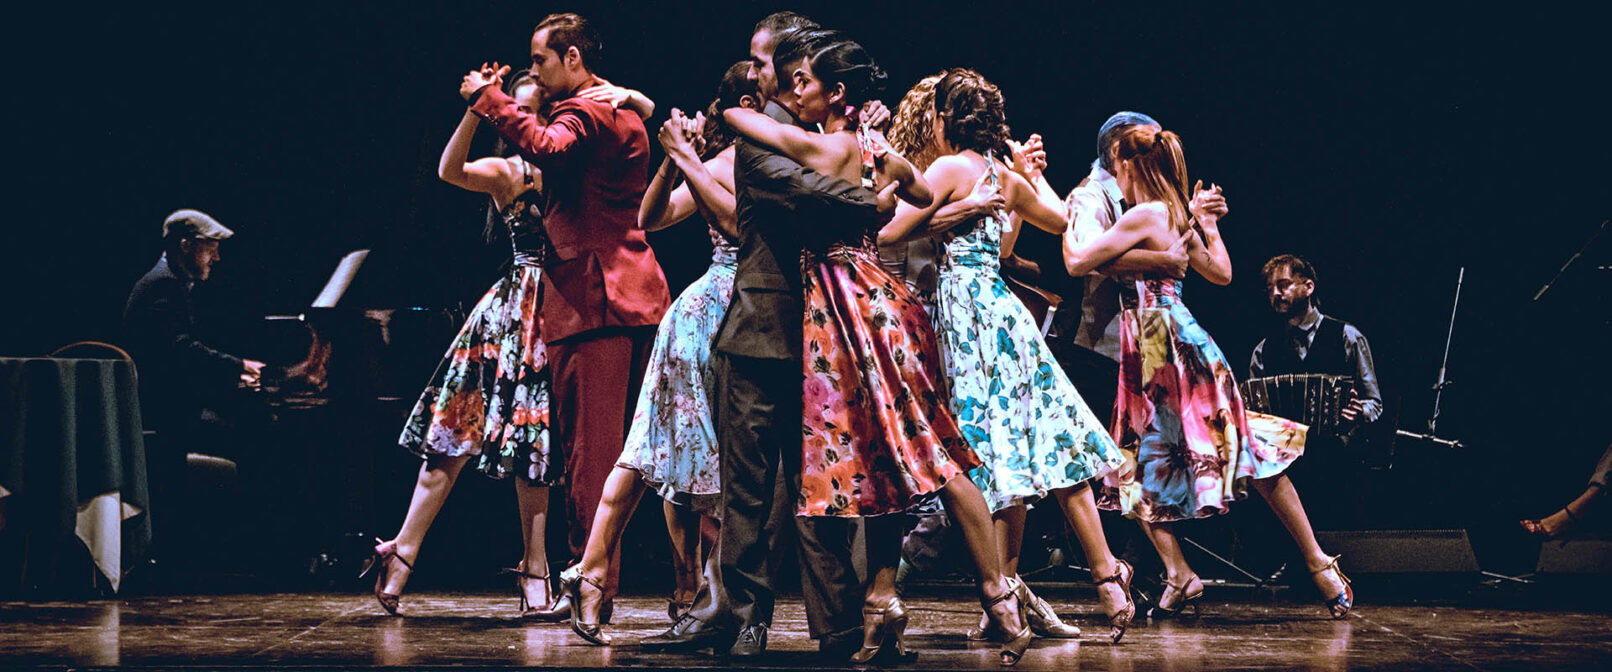 Agustina Videla. A group of mixed gender dancers in colourful dresses and suits are grouped tightly together, dancing in pairs.